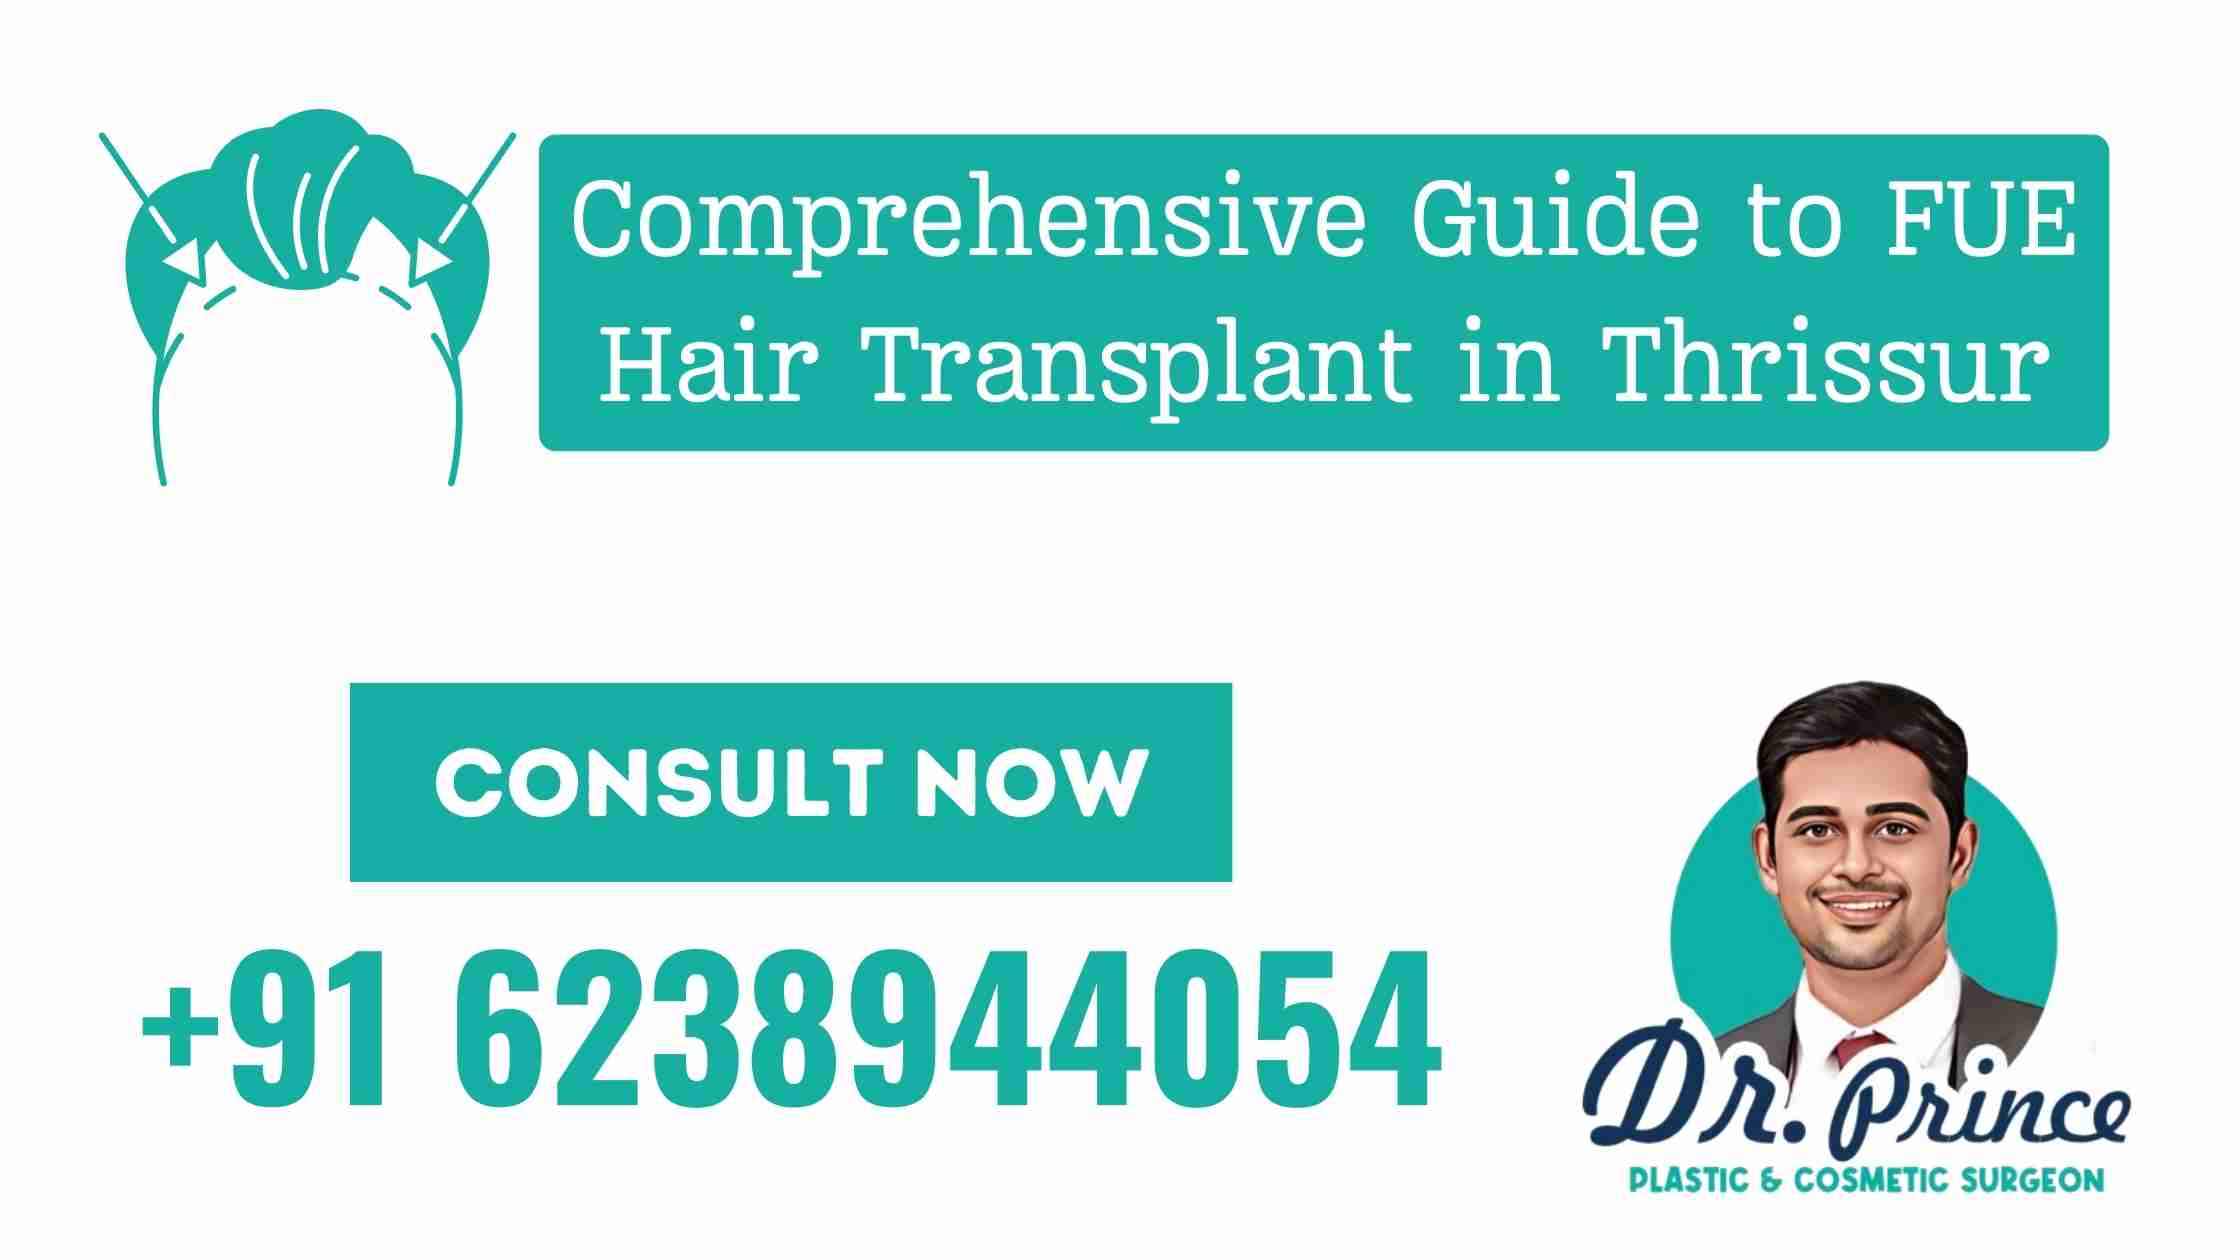 Dr. Prince, Board-Certified Plastic Surgeon, performing FUE hair transplant at Sushrutha Institute, Thrissur.